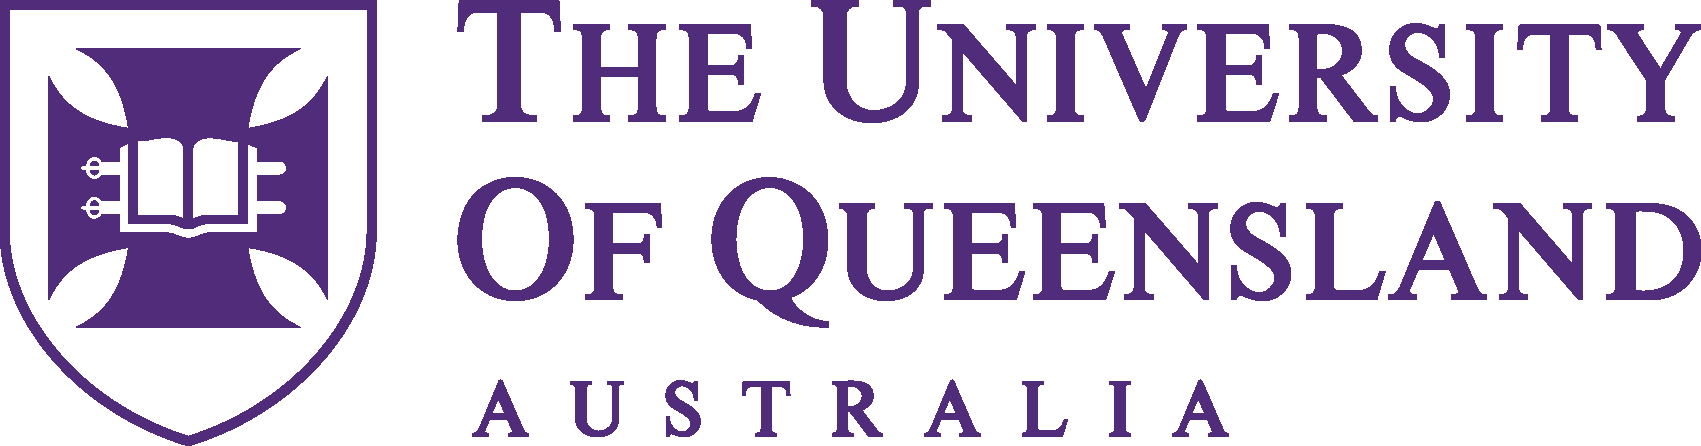 On the left is a purple outline of a shield, with a purple cross and white book in the middle. On the right the words "The University of Queensland Australia" are in purple text.